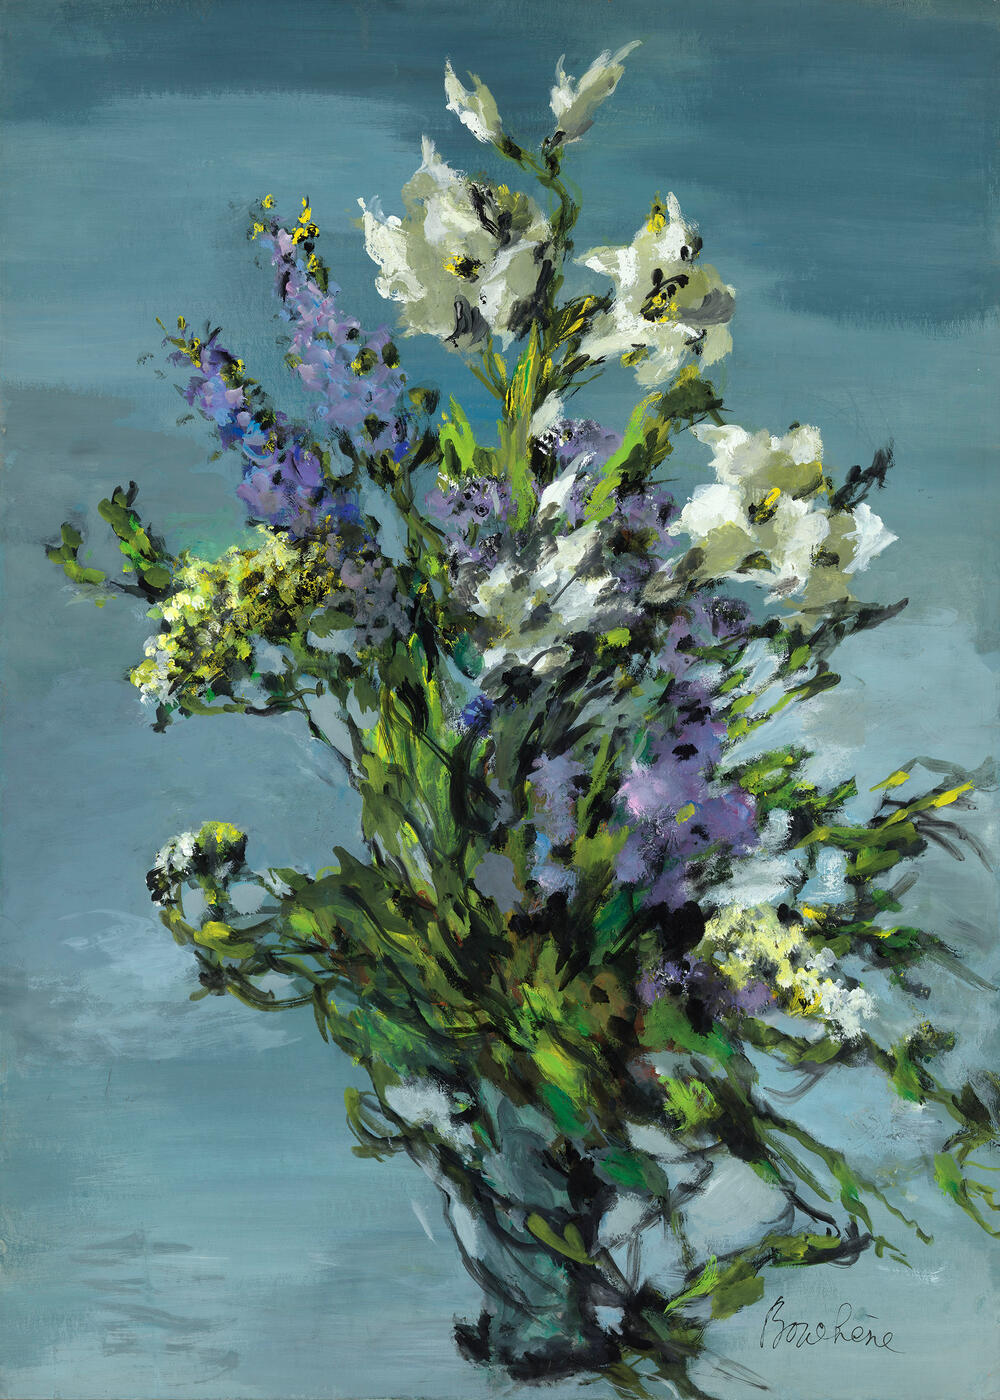 Flowers Against the Blue Background